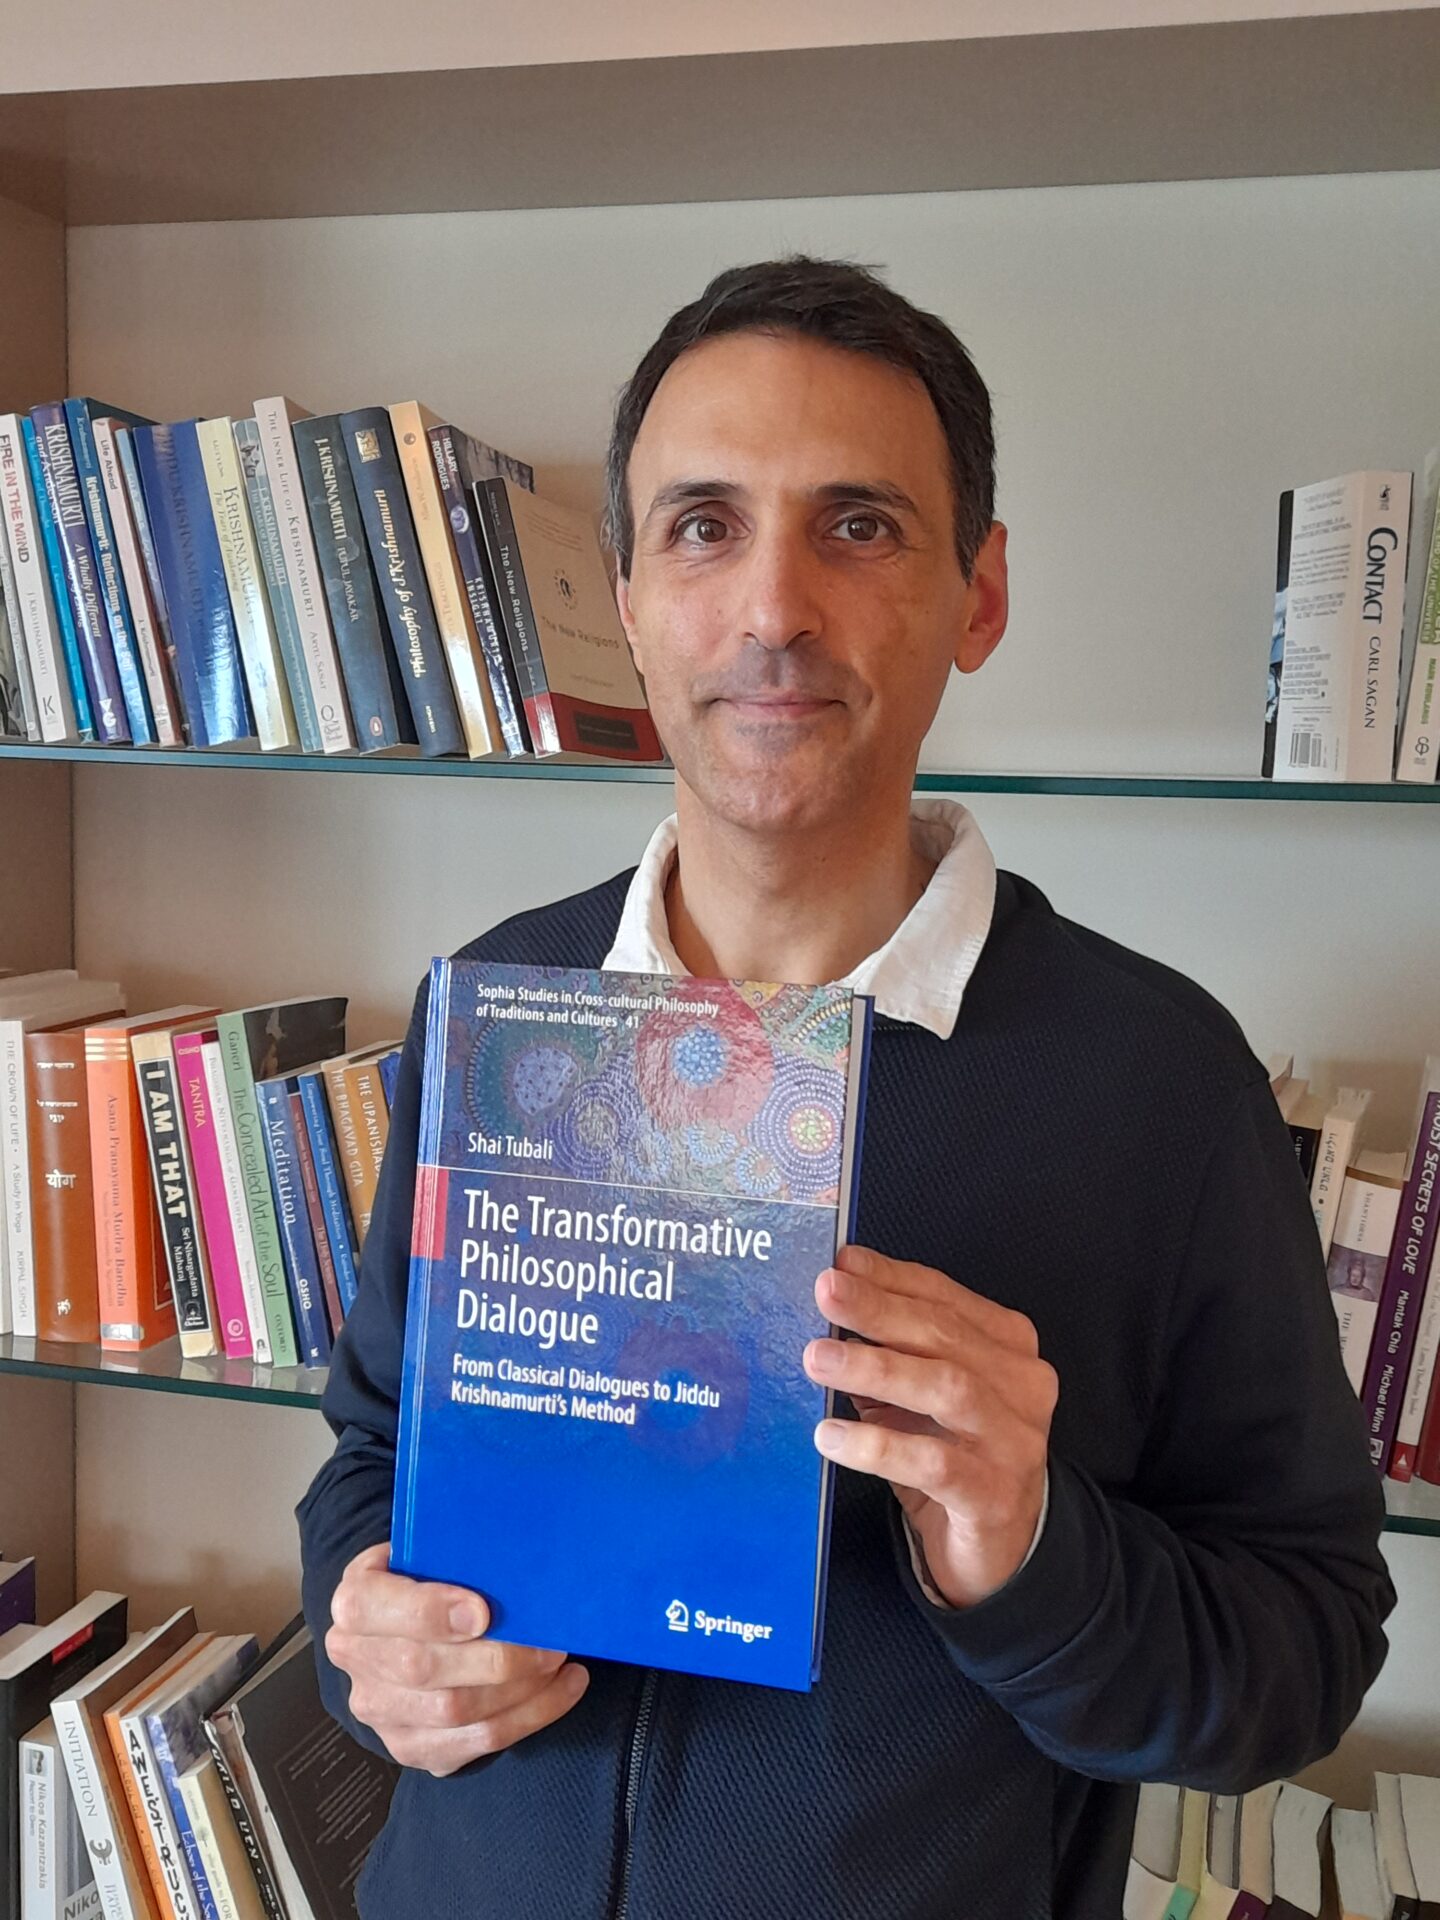 Dr Shai Tubali holding his new book. He is stood in front of a bookshelf